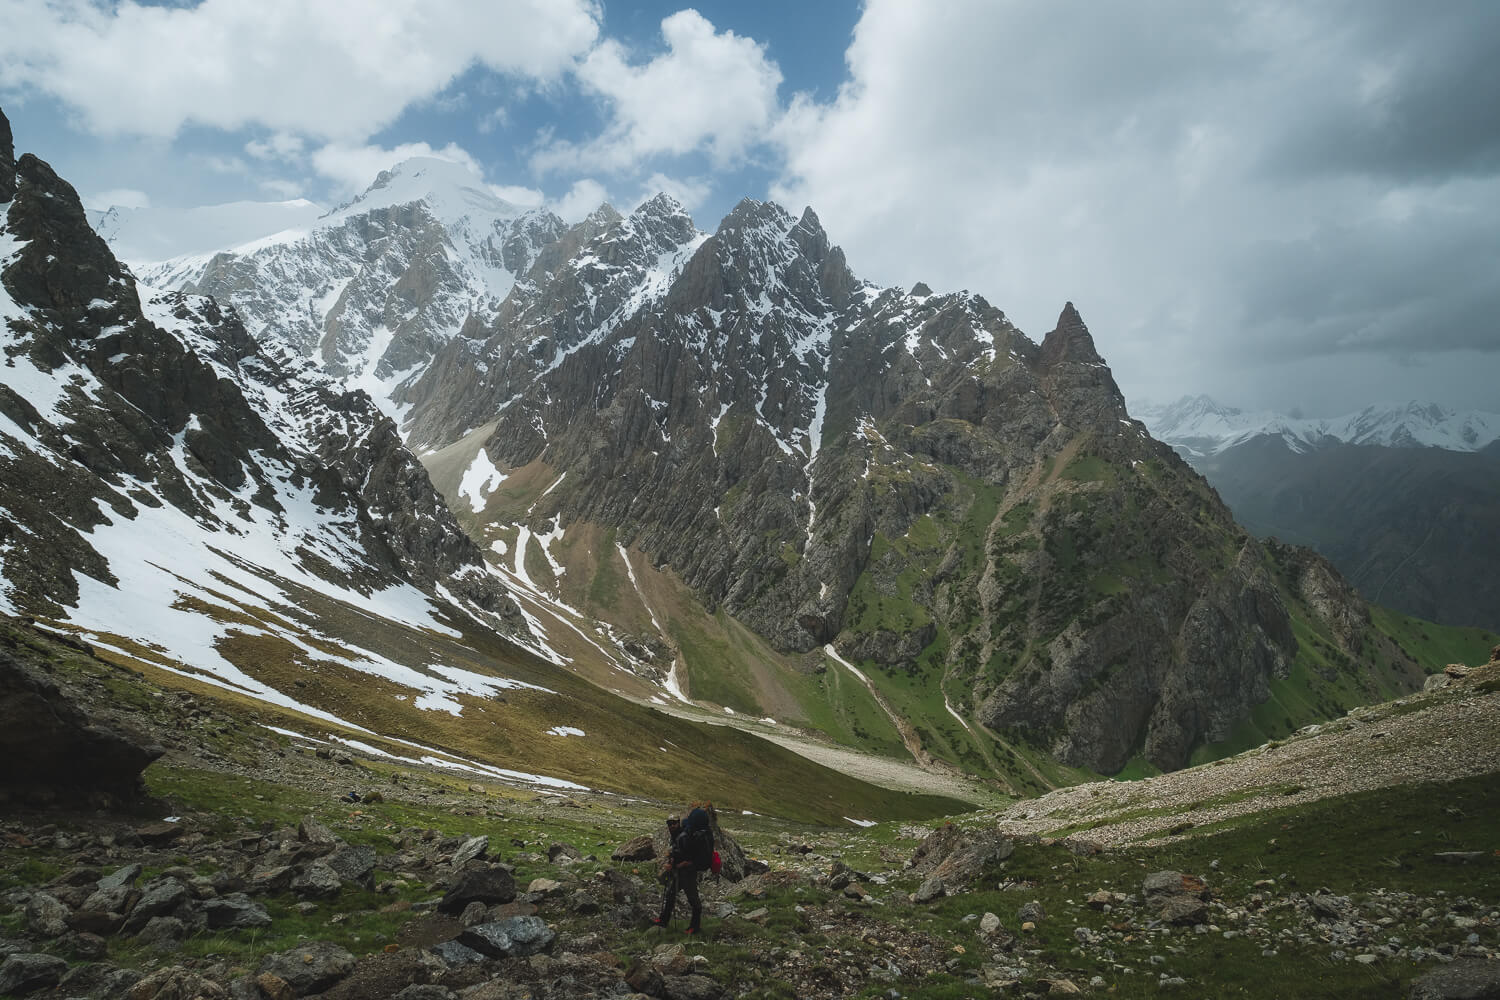 Disappearing into the Kyrgyzstan wilderness with the best backpcking equipment